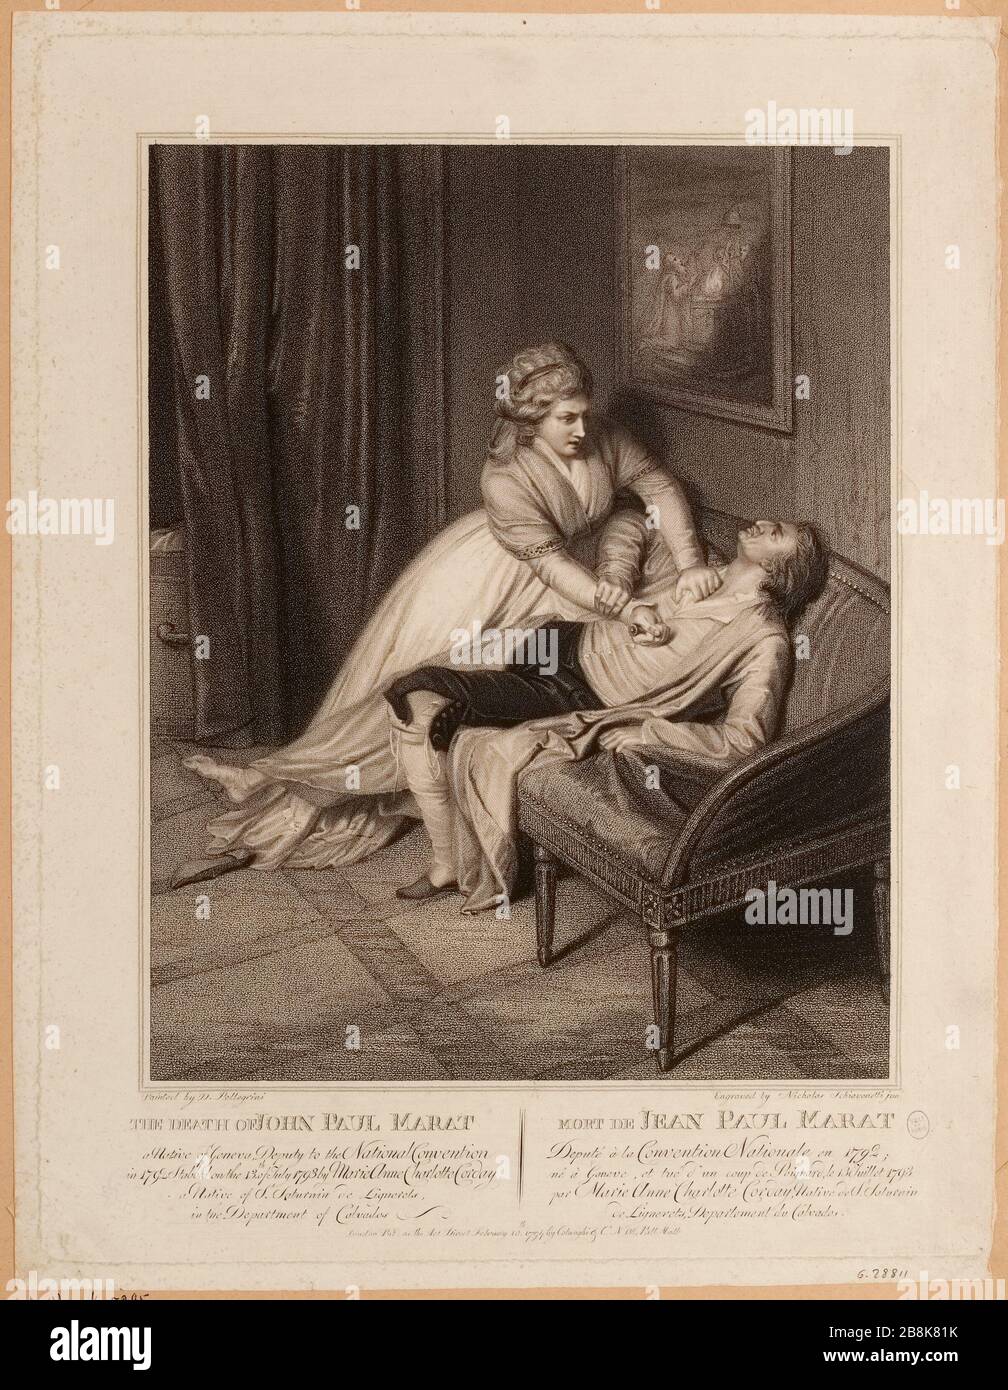 Assassination of Jean-Paul Marat by Charlotte Corday 13 July 1793. French  Revolution. (Dummy title Stock Photo - Alamy